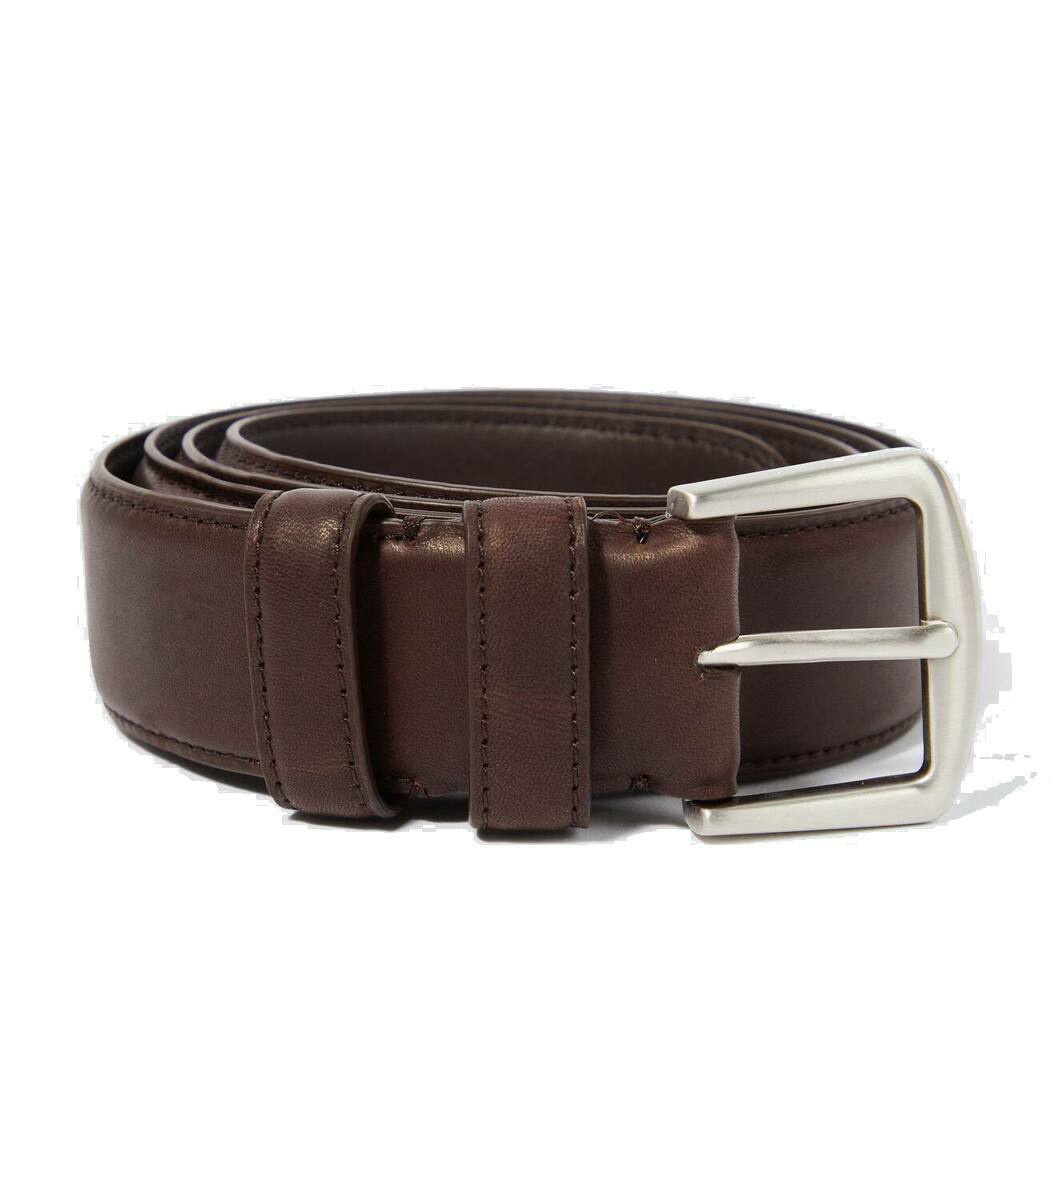 Italian Woven Cotton Belt in Olive, Brown & White by Torino Leather Co. -  Hansen's Clothing